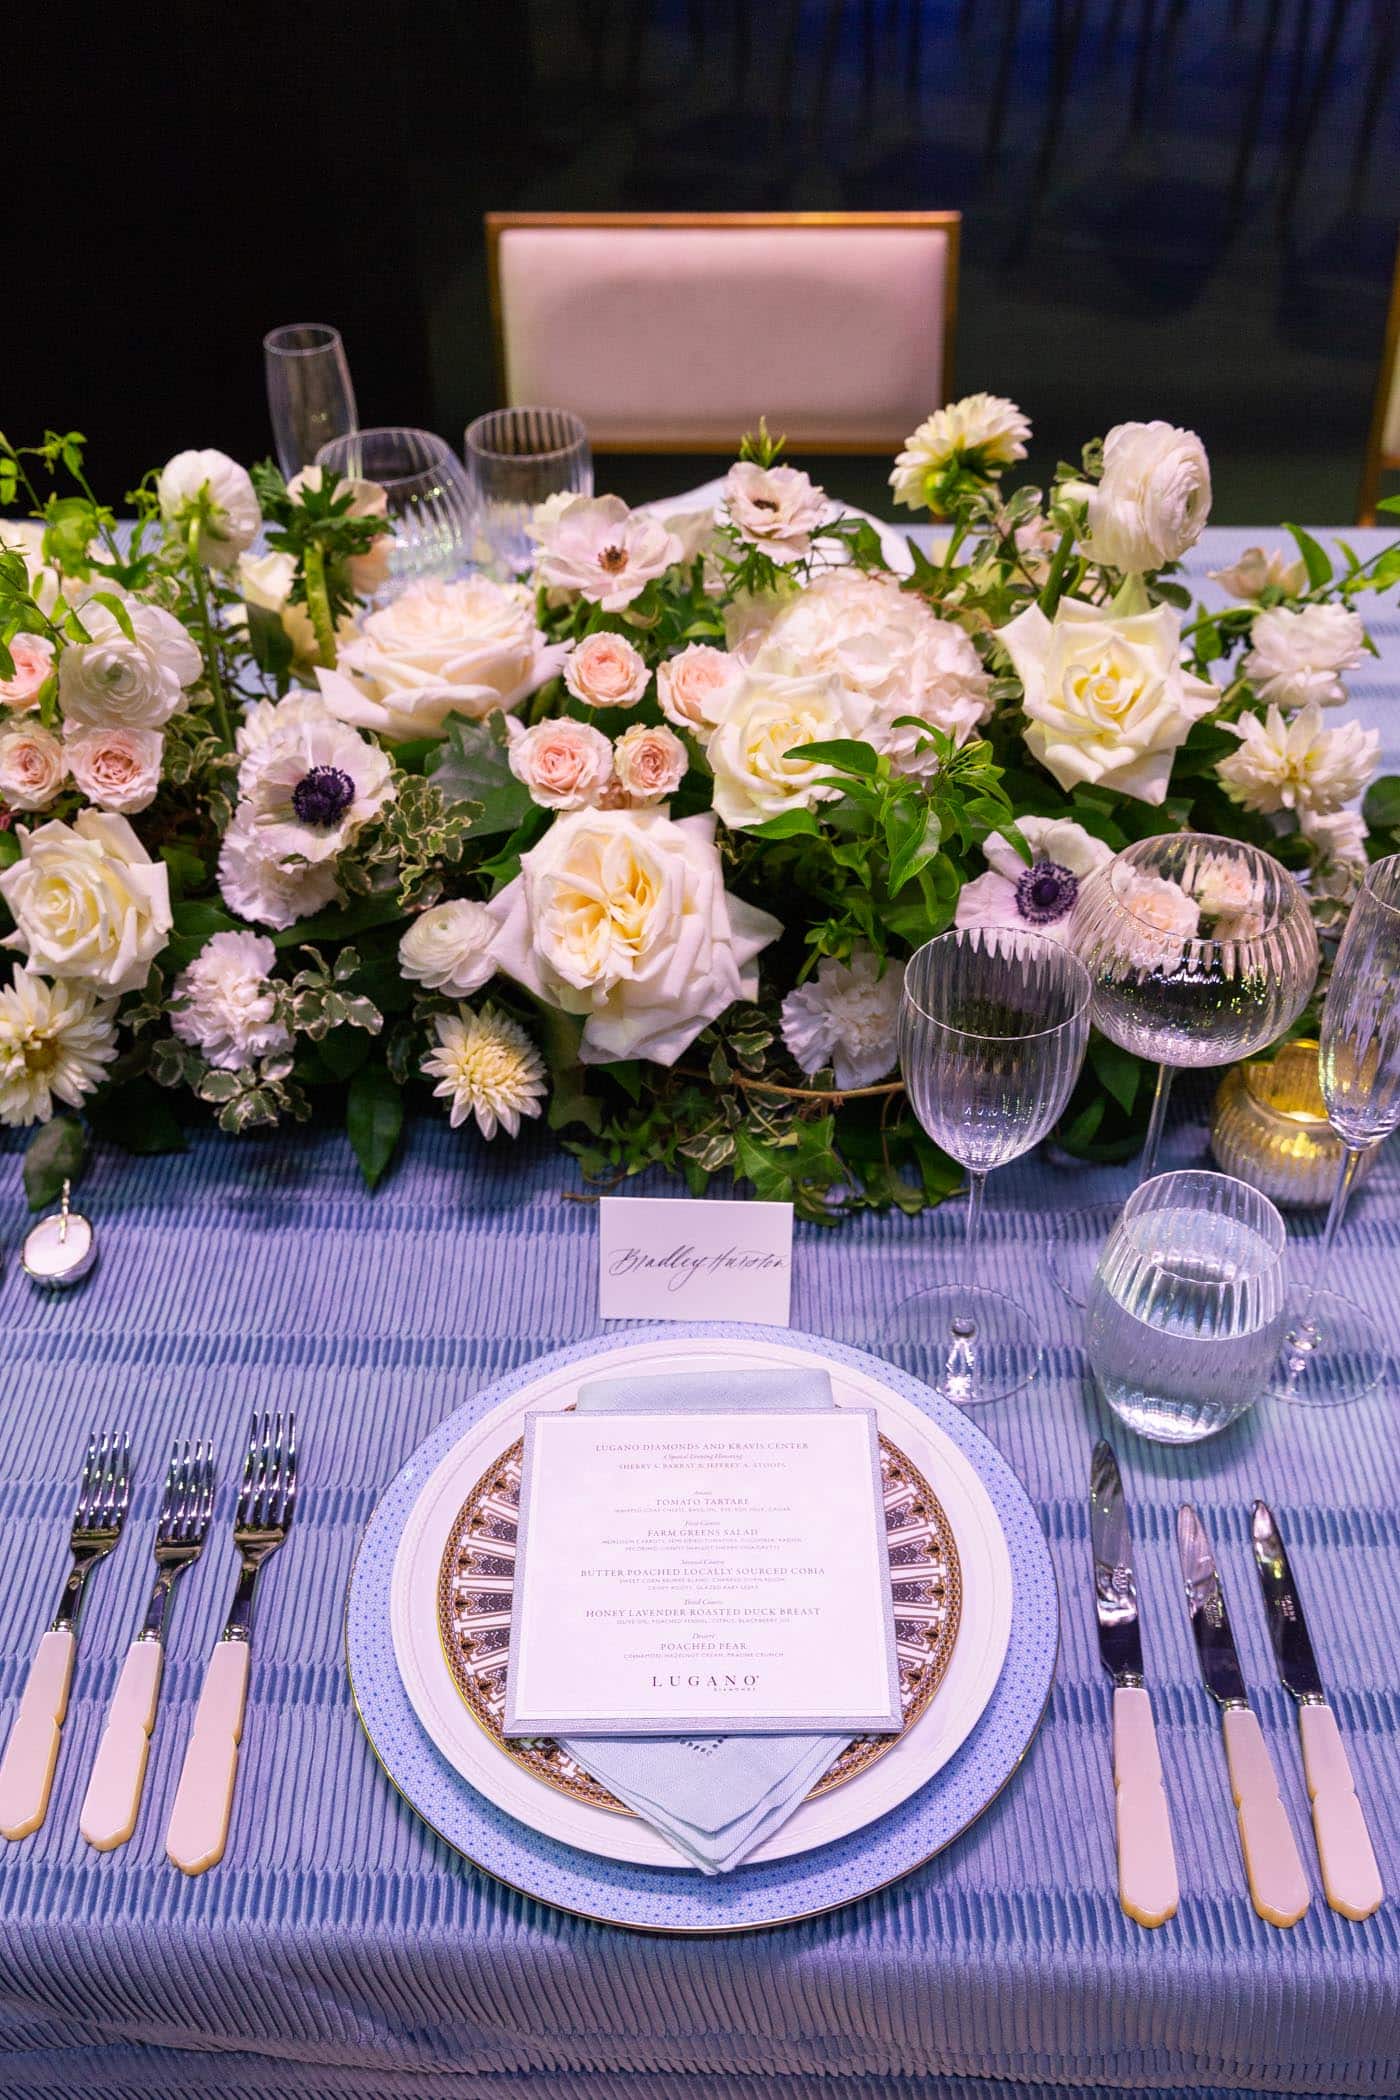 Table setting featuring menu and floral arrangement.